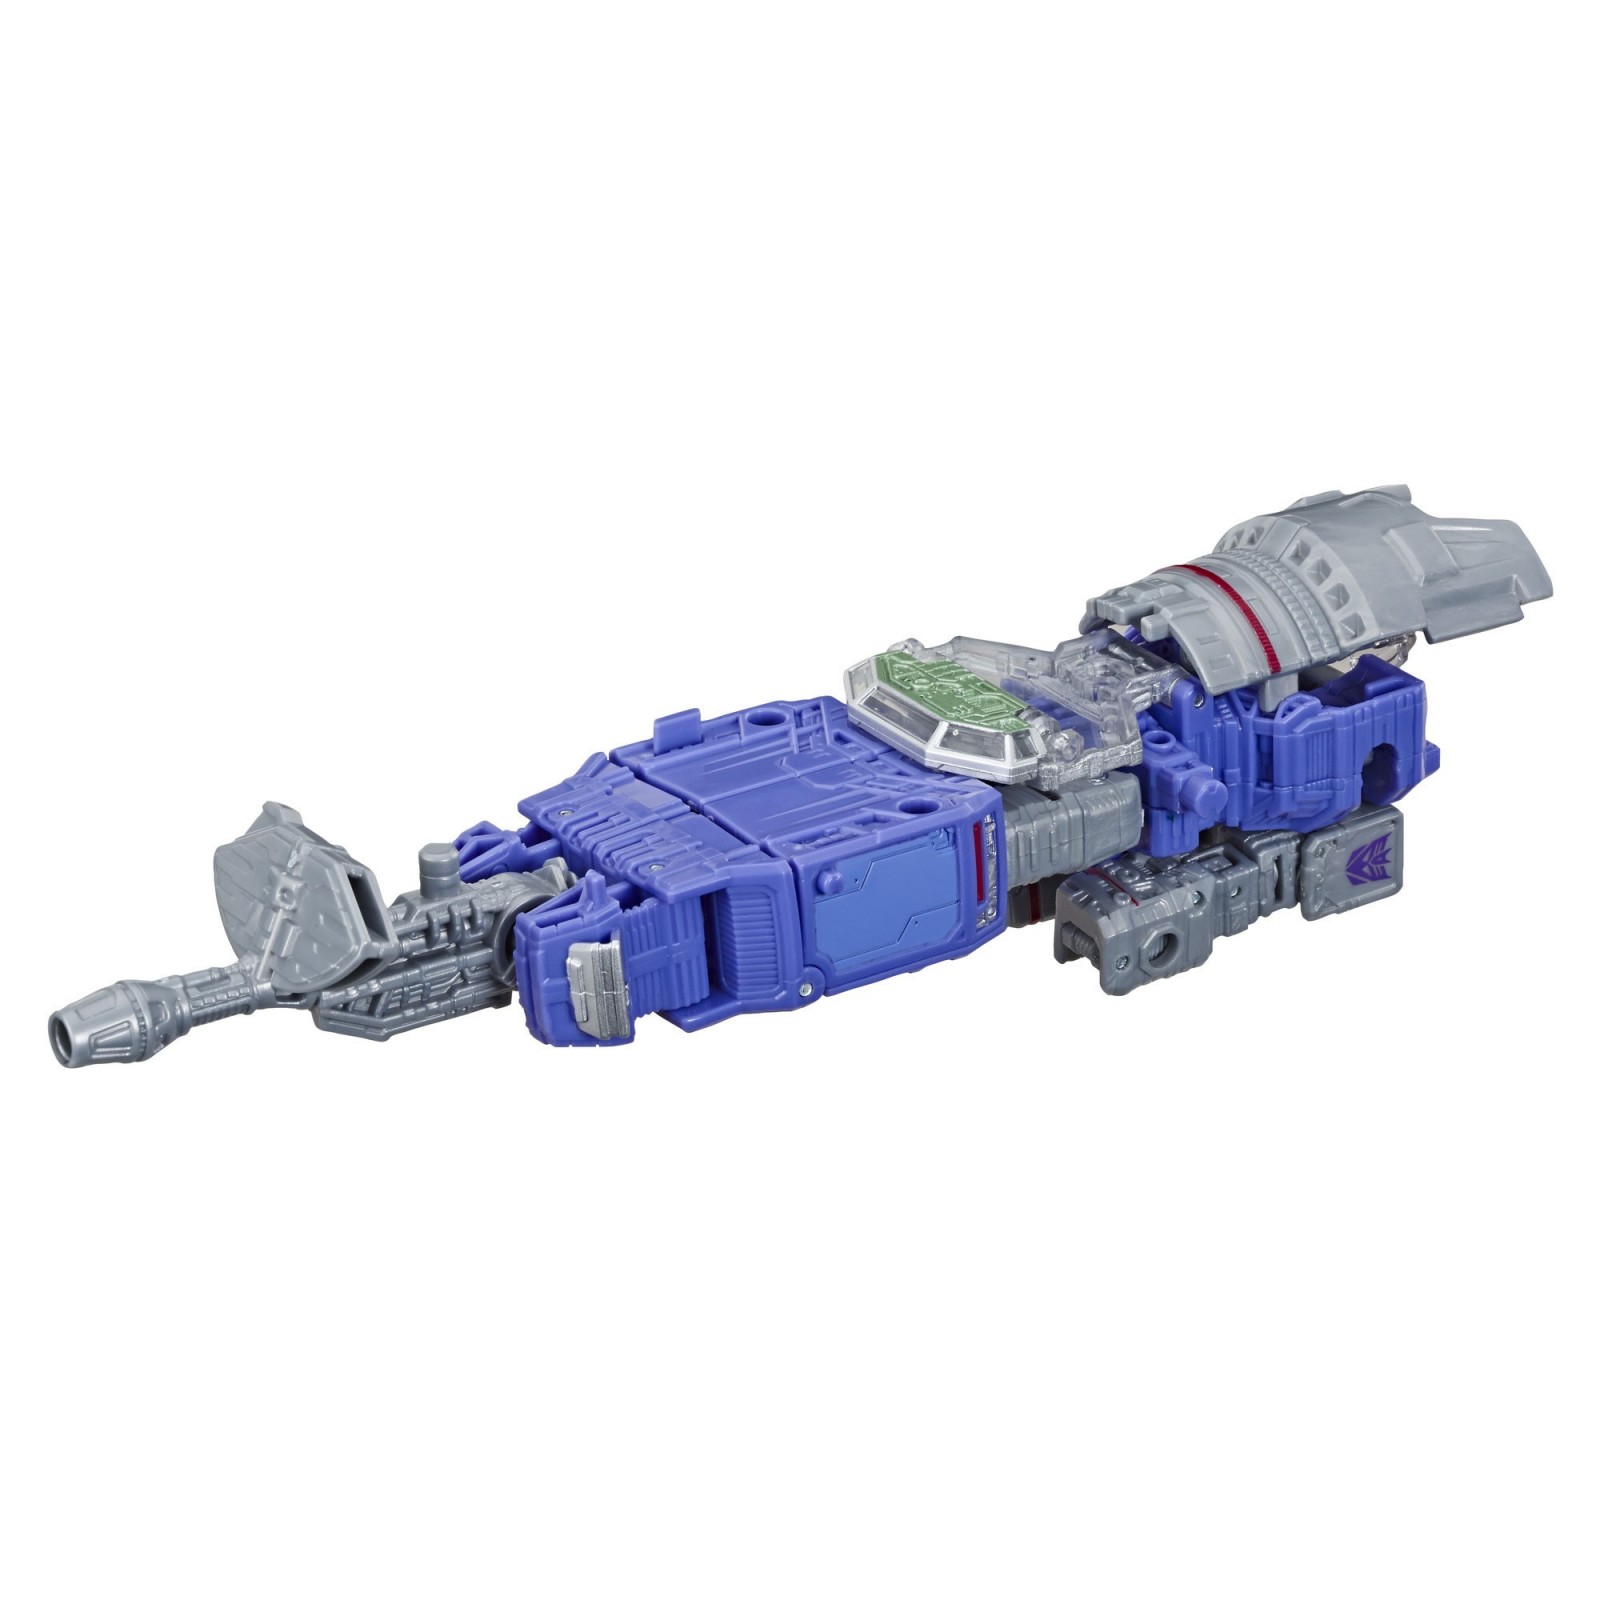 Transformers News: SIEGE Refraktor and Red Alert in stock with immediate shipping at Walmart.com